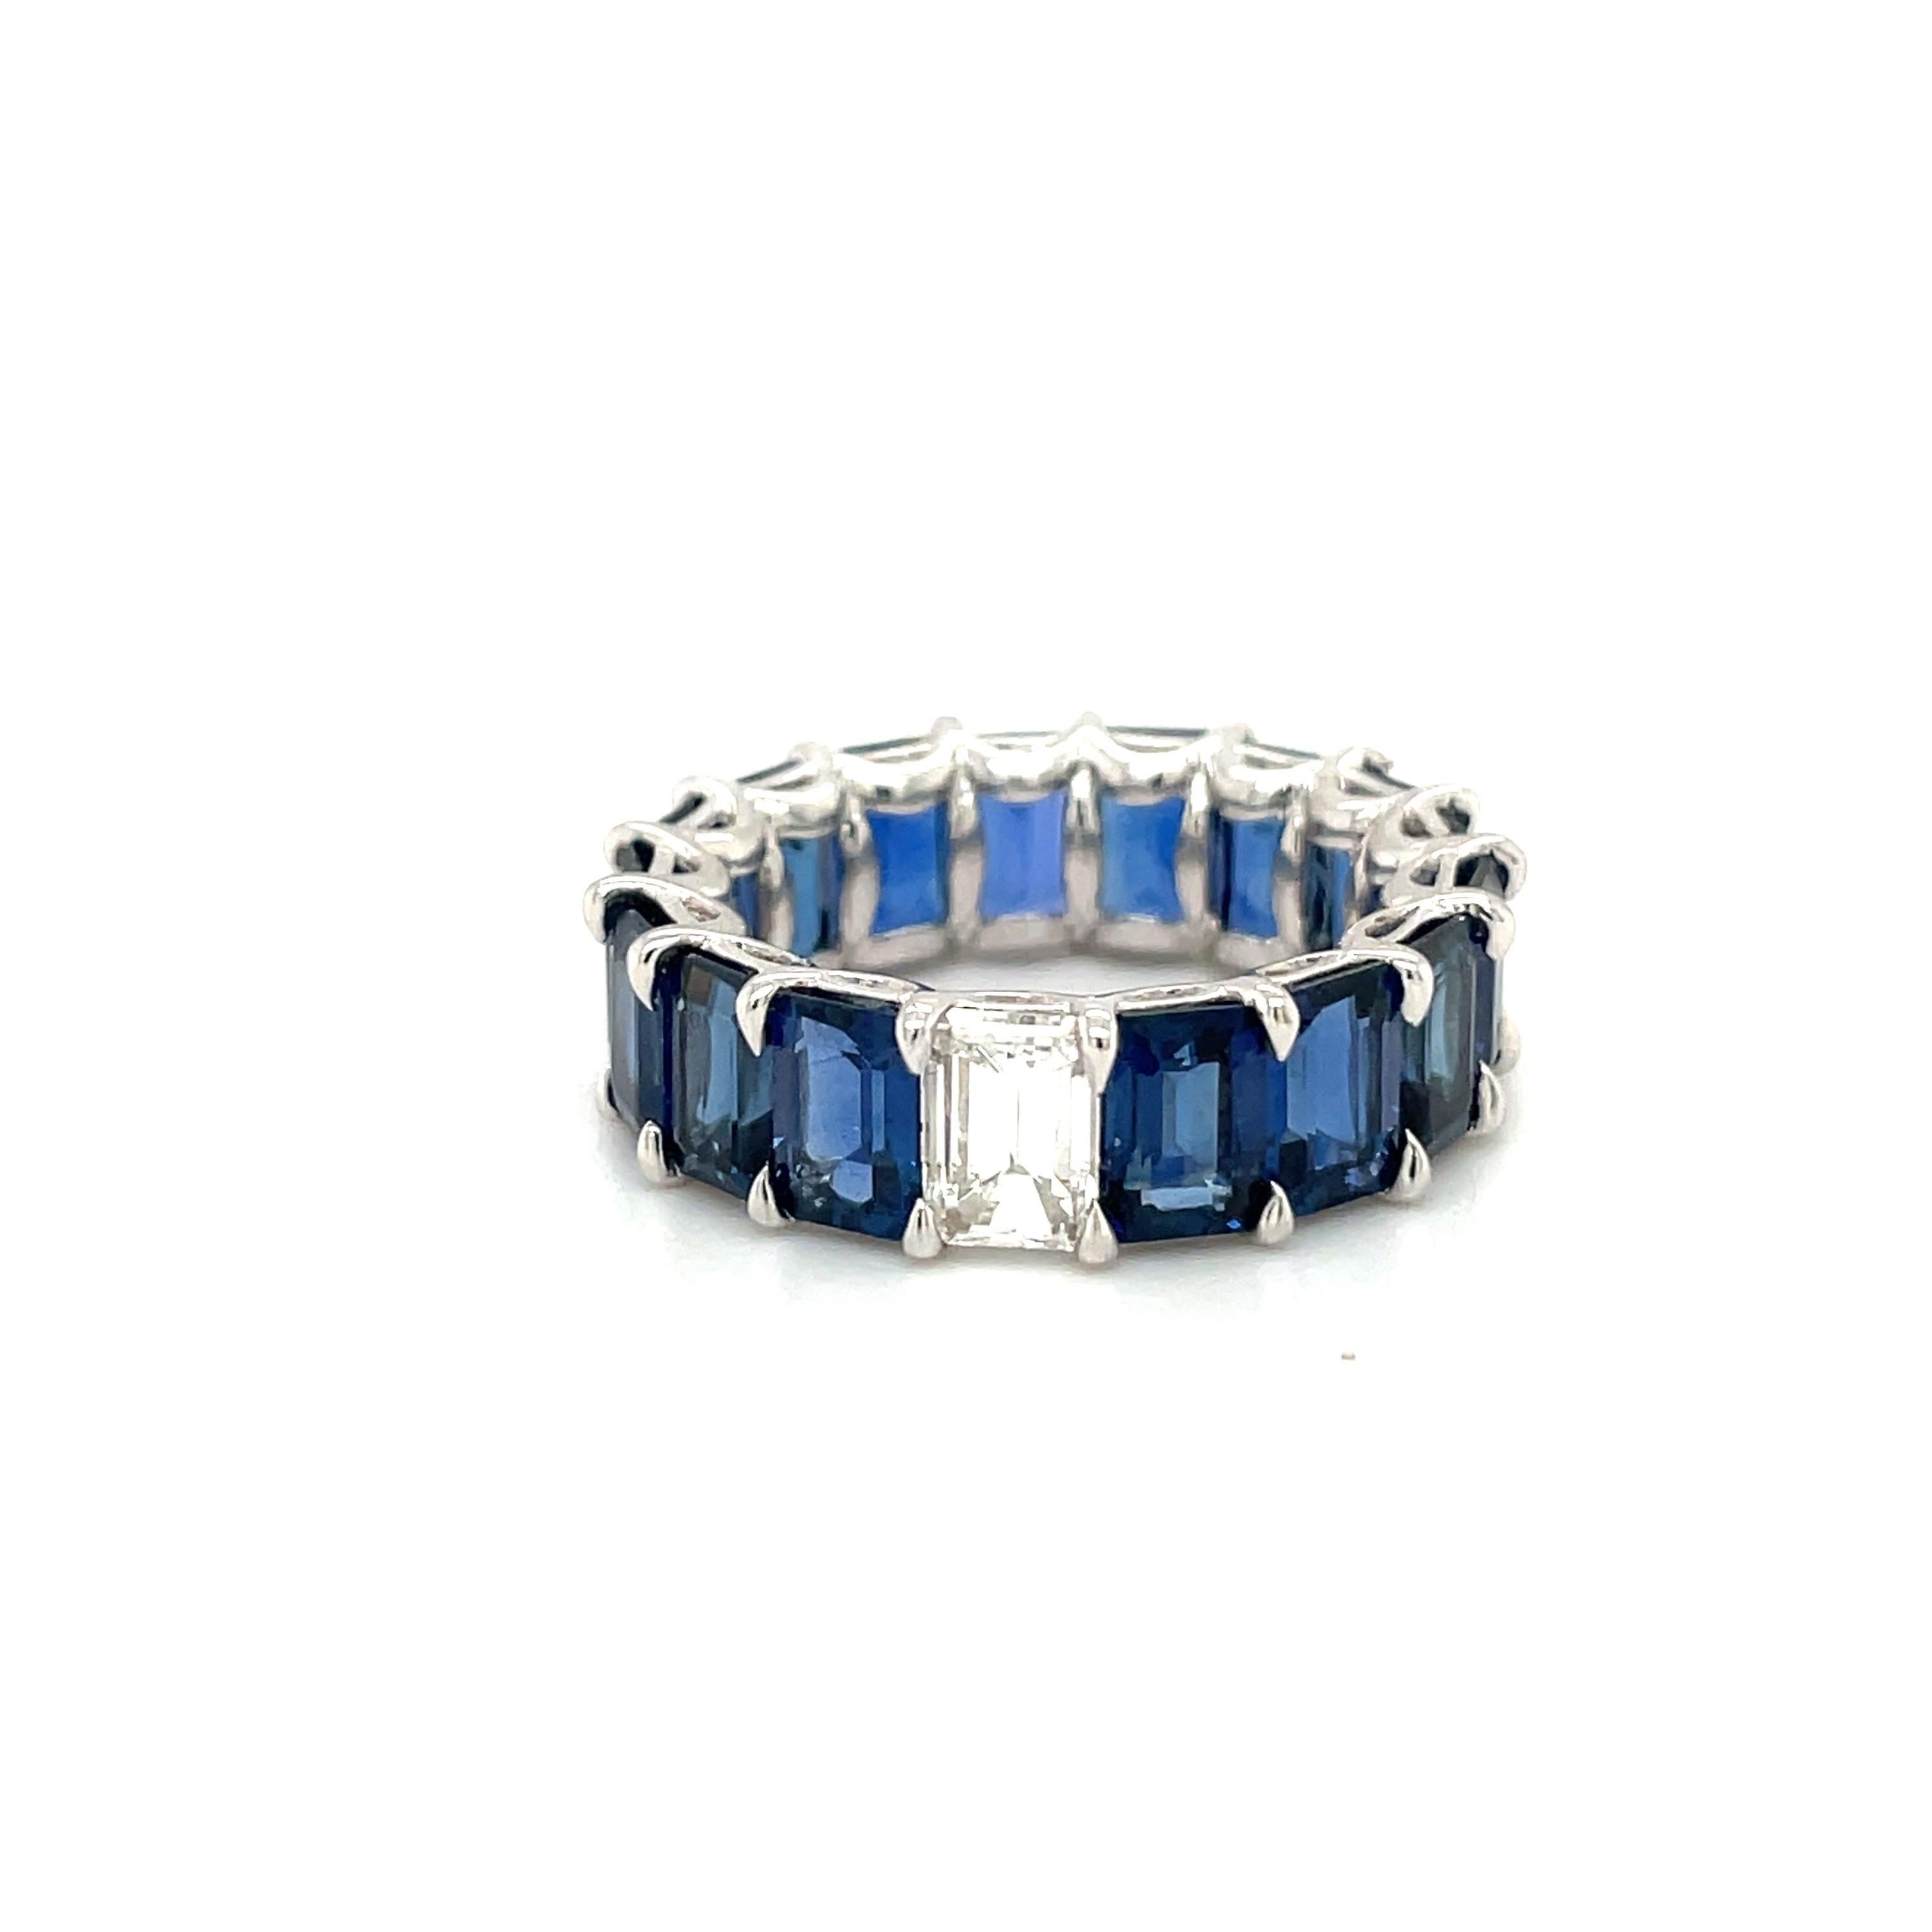 Magnificent 18 karat white gold eternity band . This unique band is set with 16 emerald cut  blue sapphires and 1 emerald cut diamond in the center. This is a shared prong setting with 